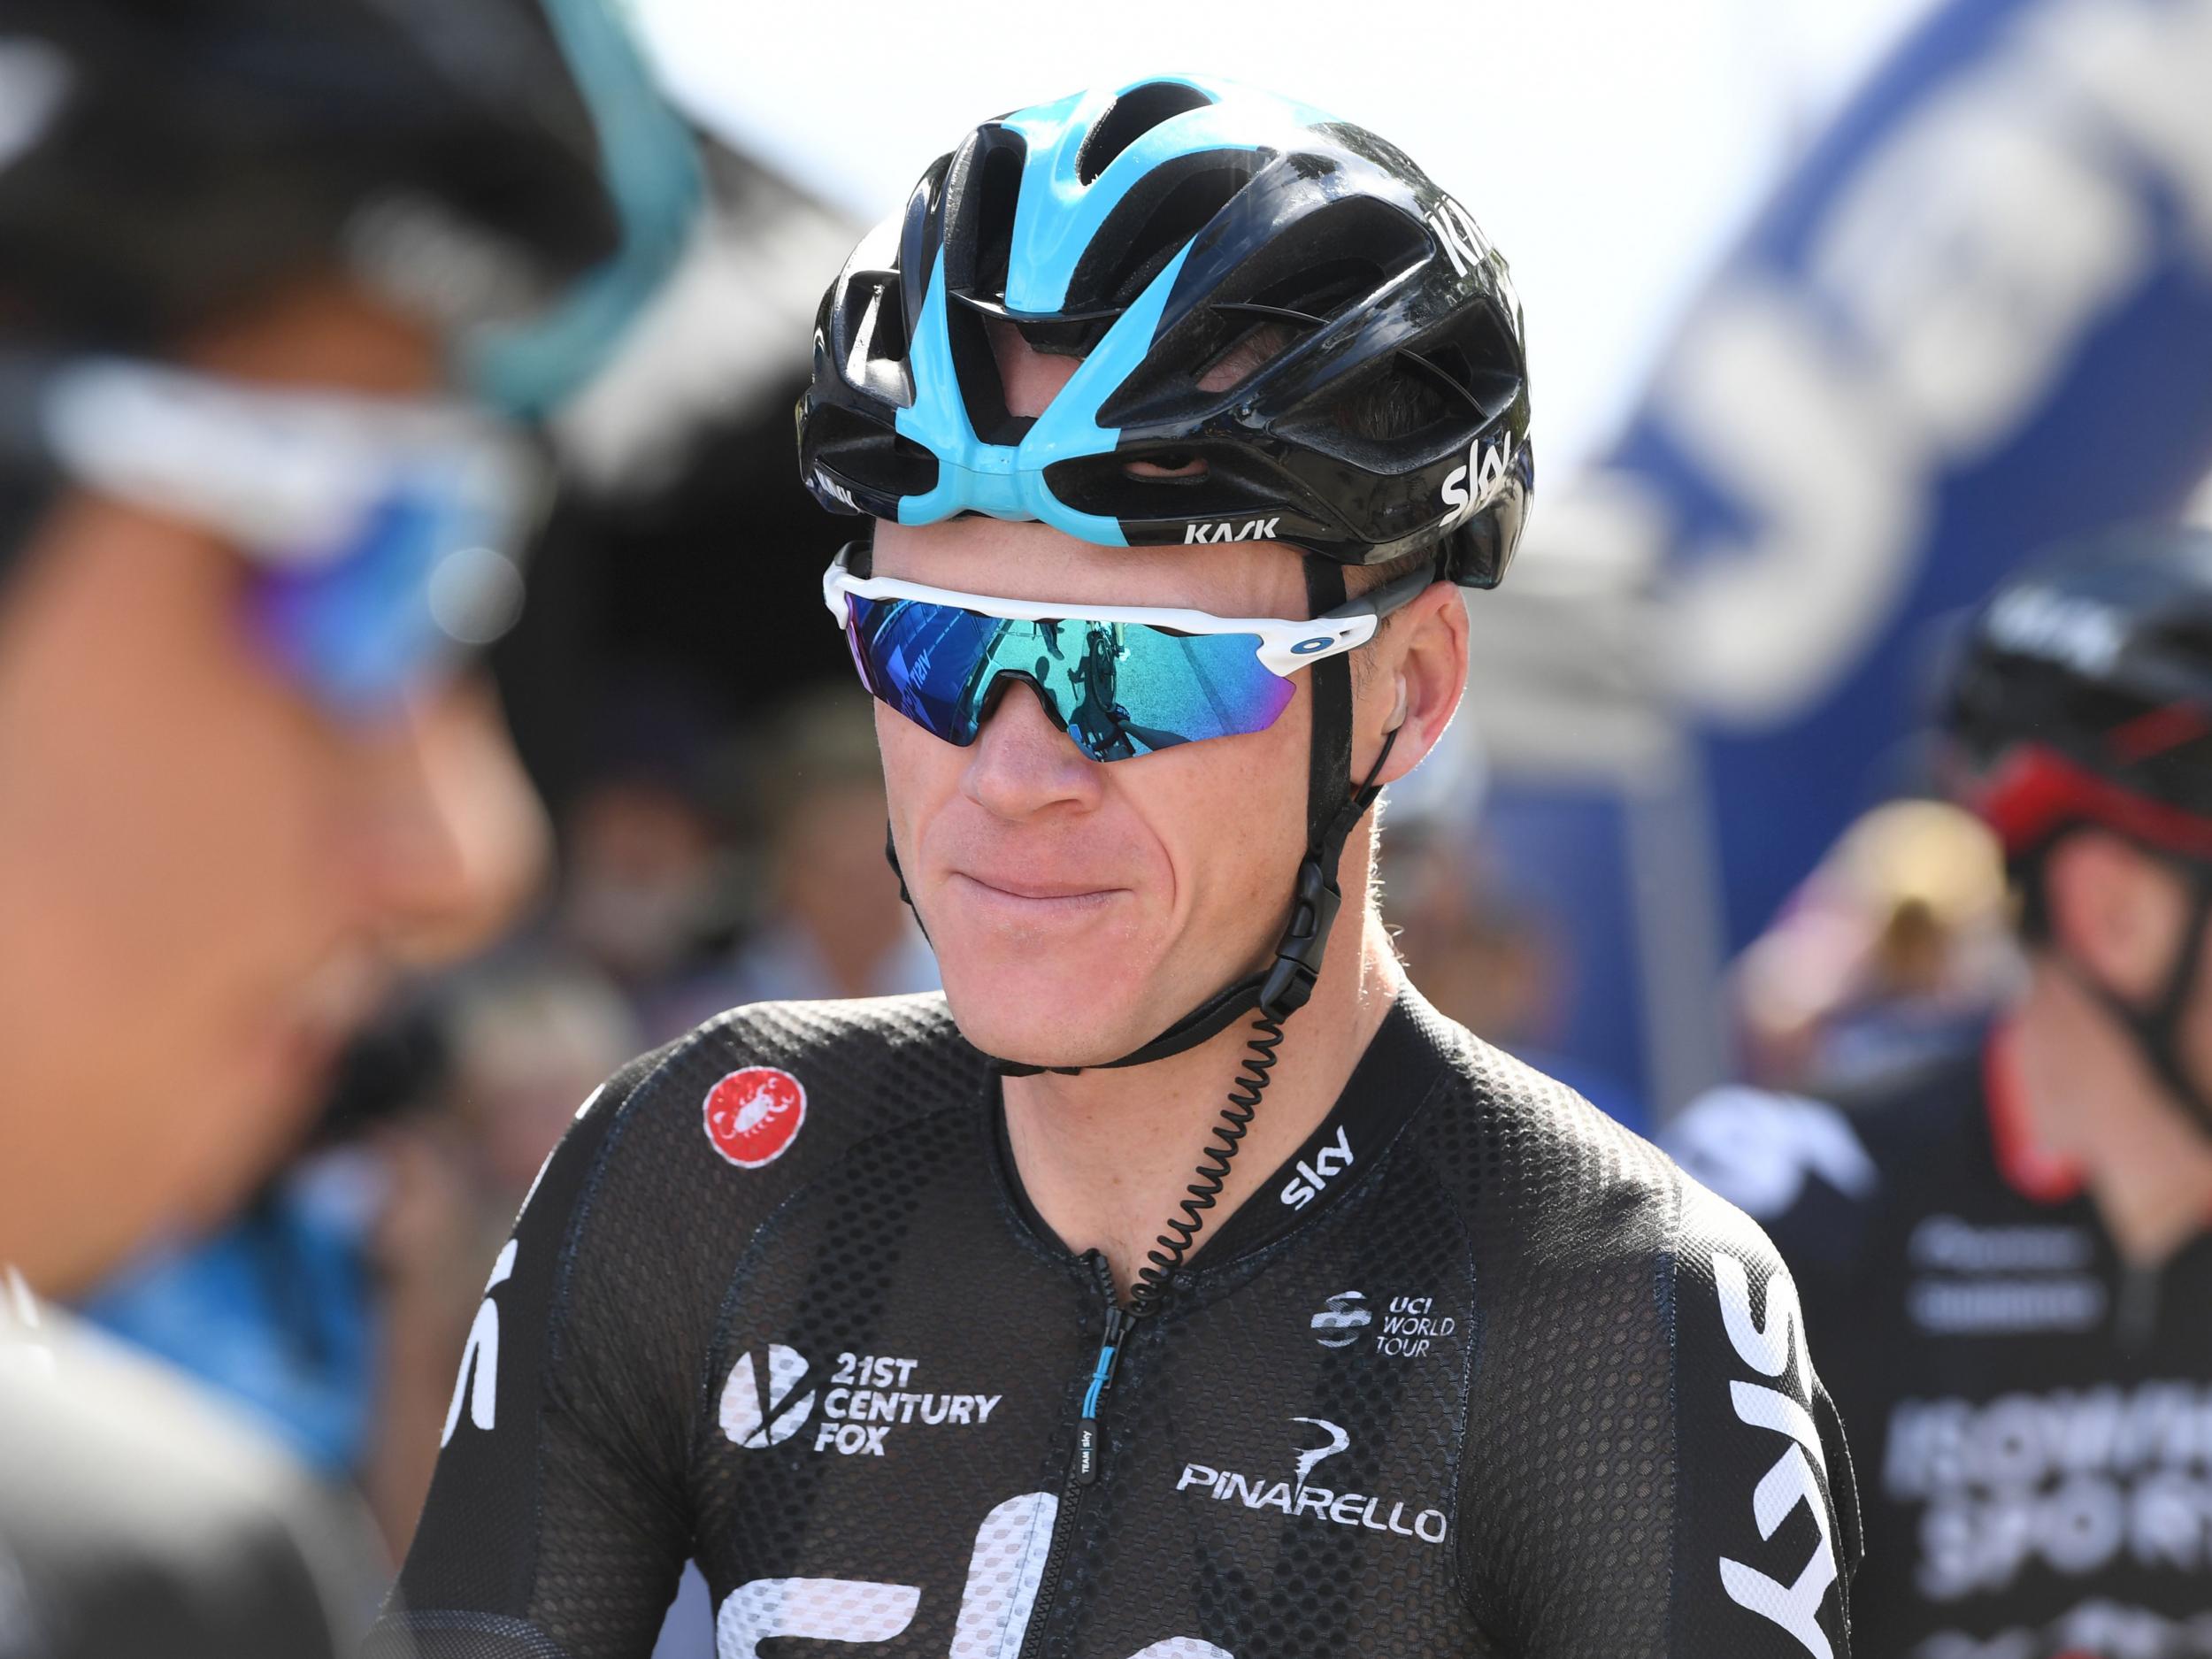 Froome had spit and urine thrown at him during last year's tour